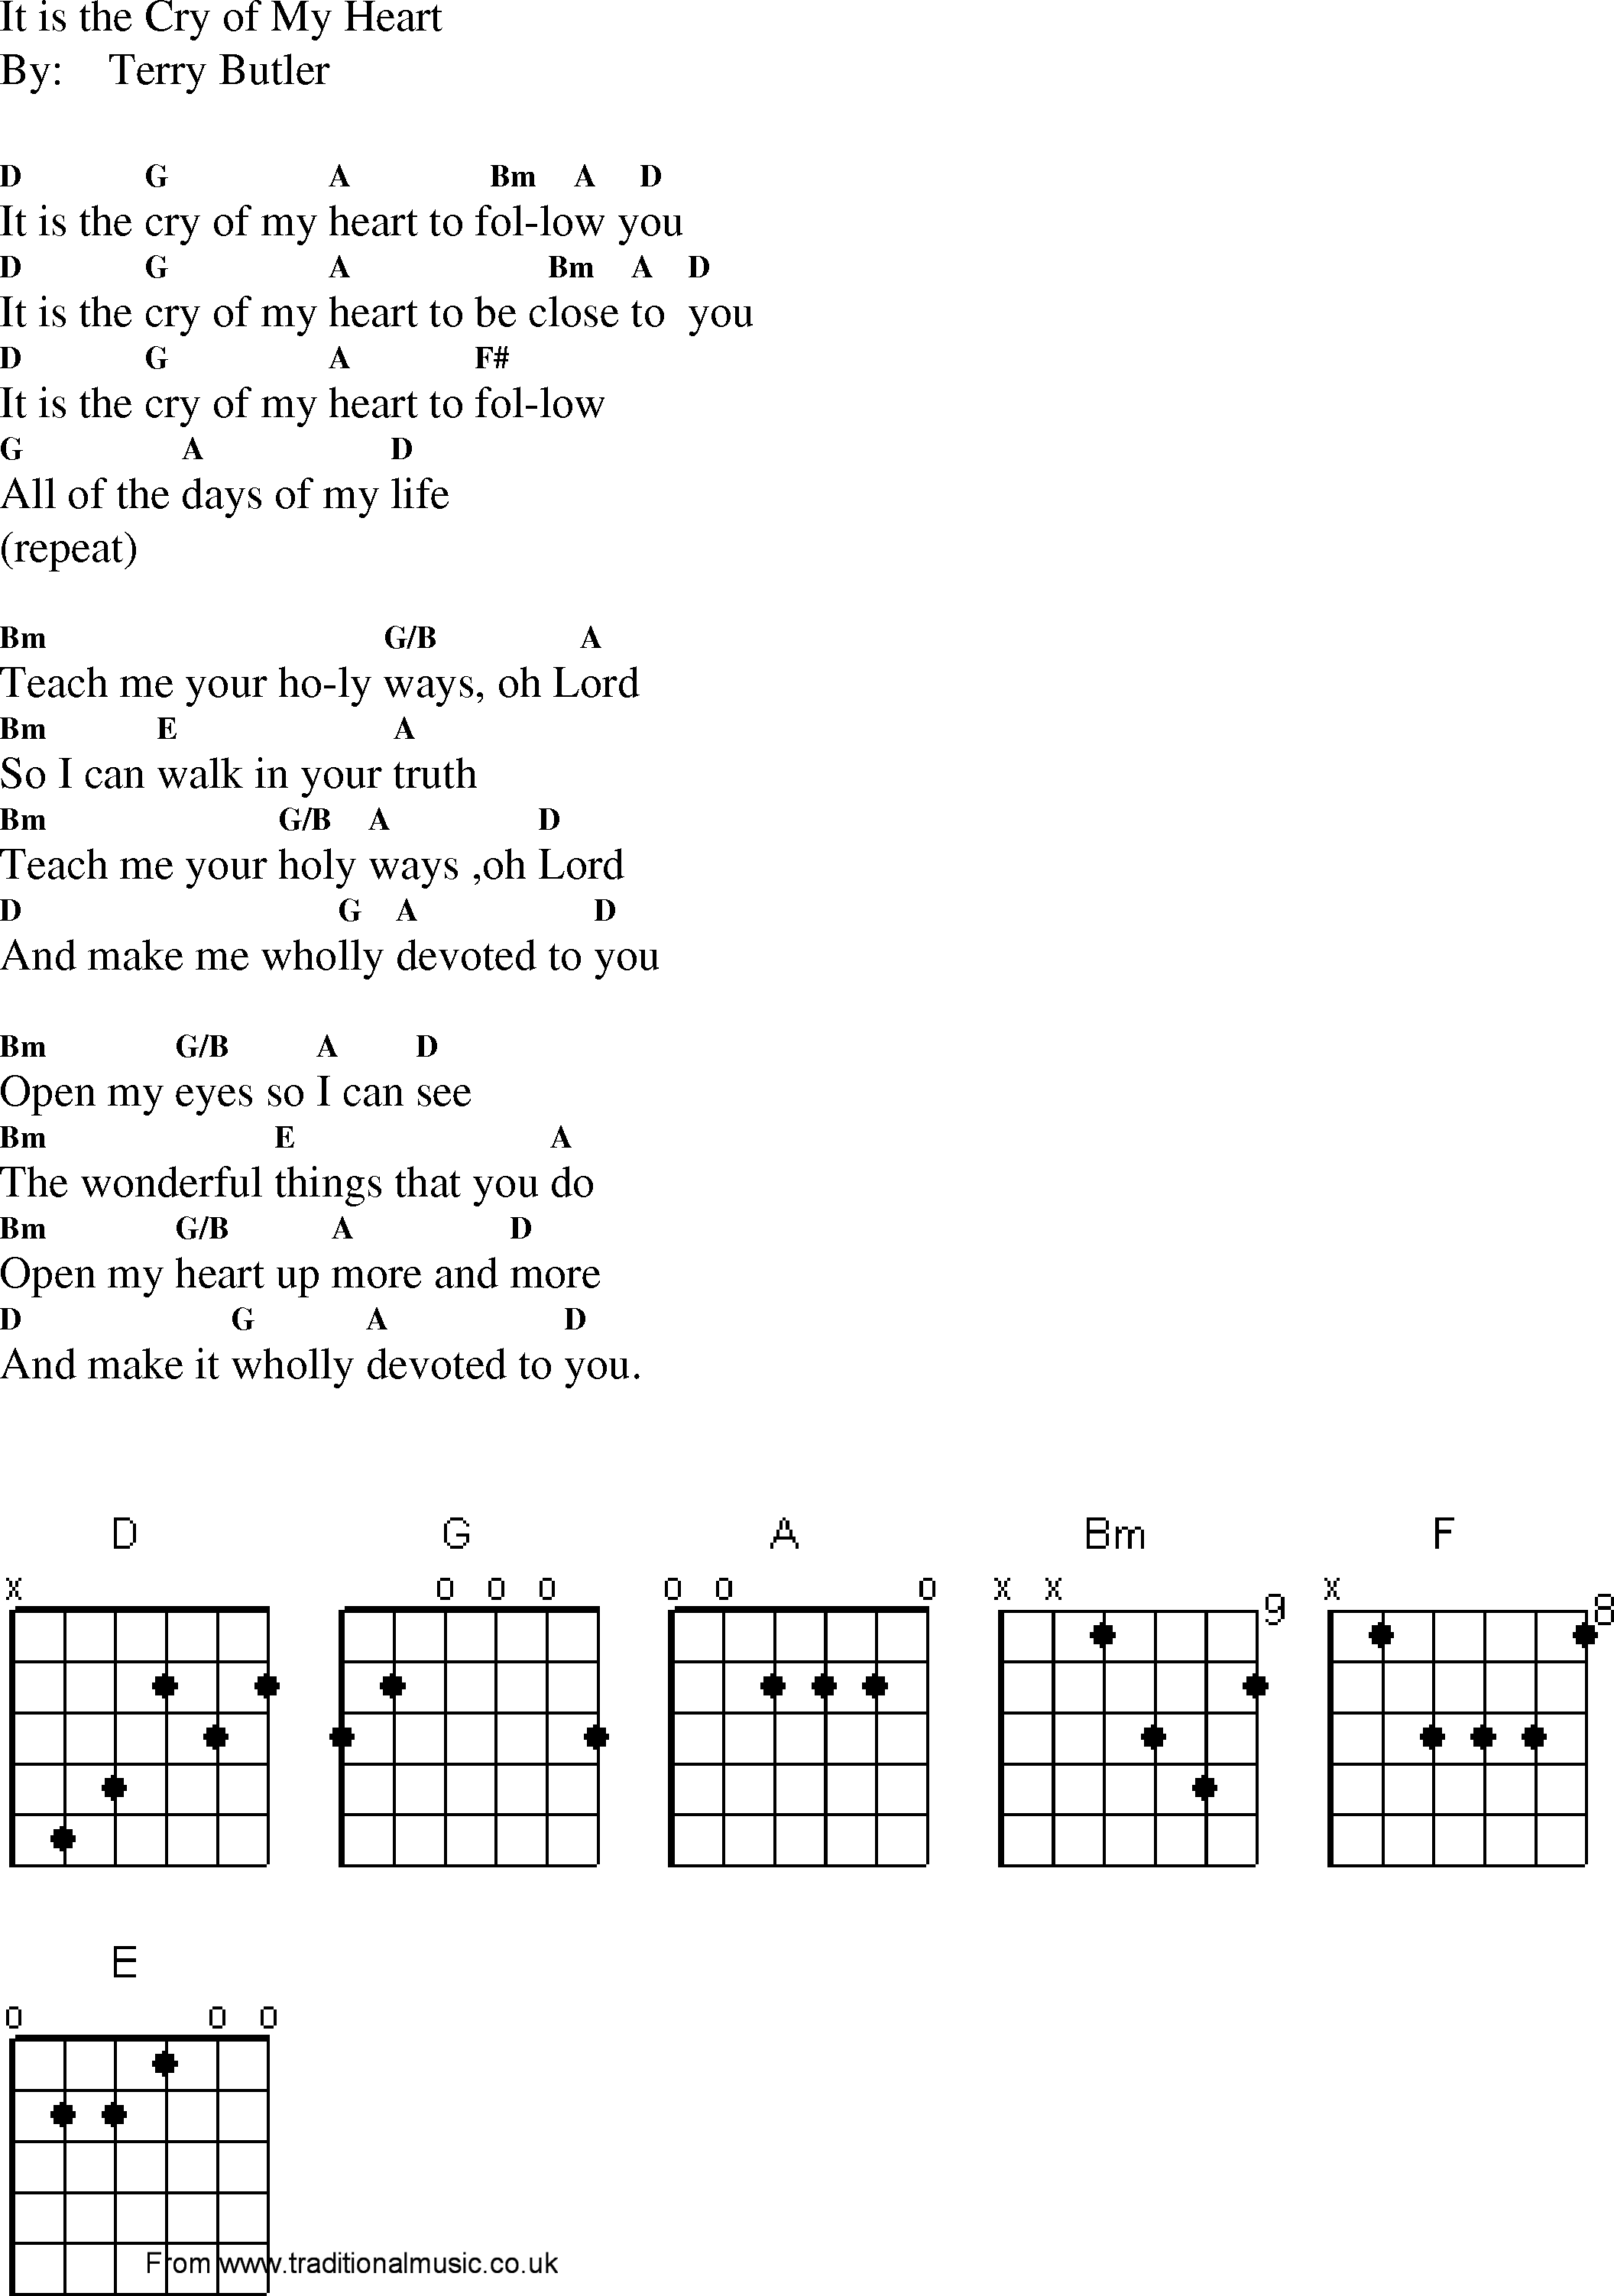 Gospel Song: it_is_the_cry_of_my_heart, lyrics and chords.